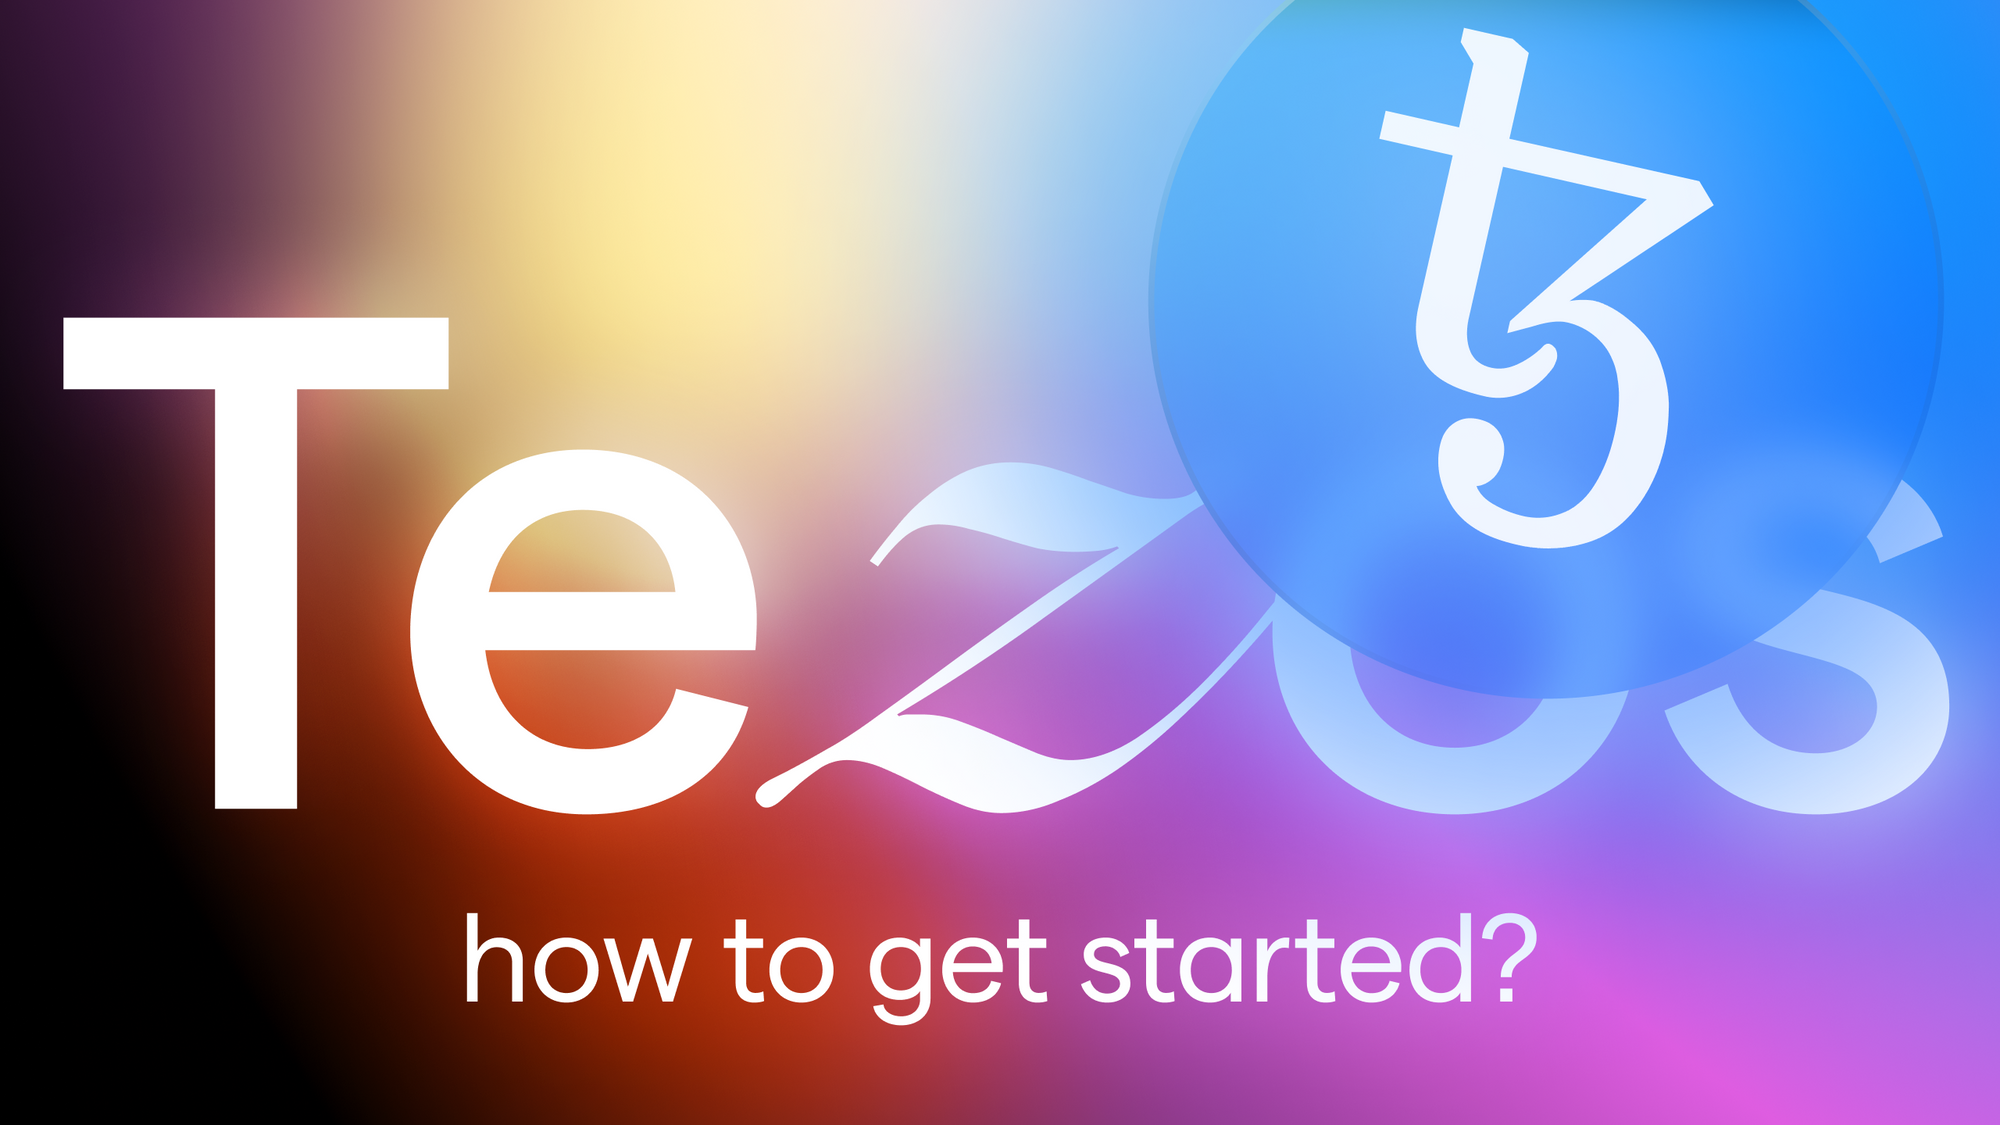 Easy Peasy $XTZ: How to Get Started on Tezos Blockchain